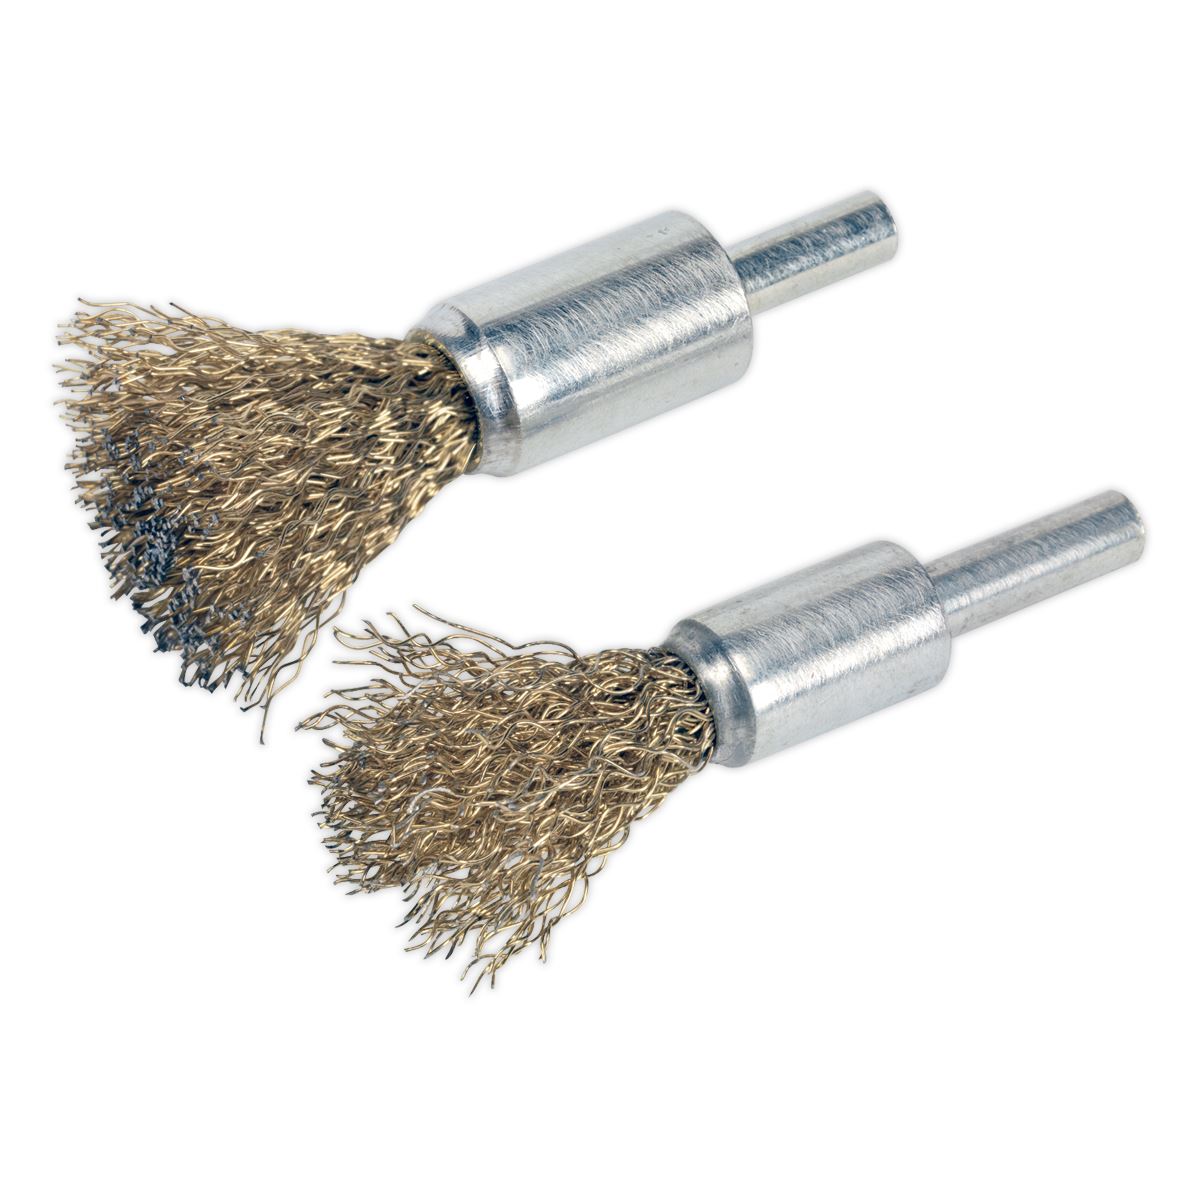 Sealey Decarbonising Crimped Wire Brush Set 2pc